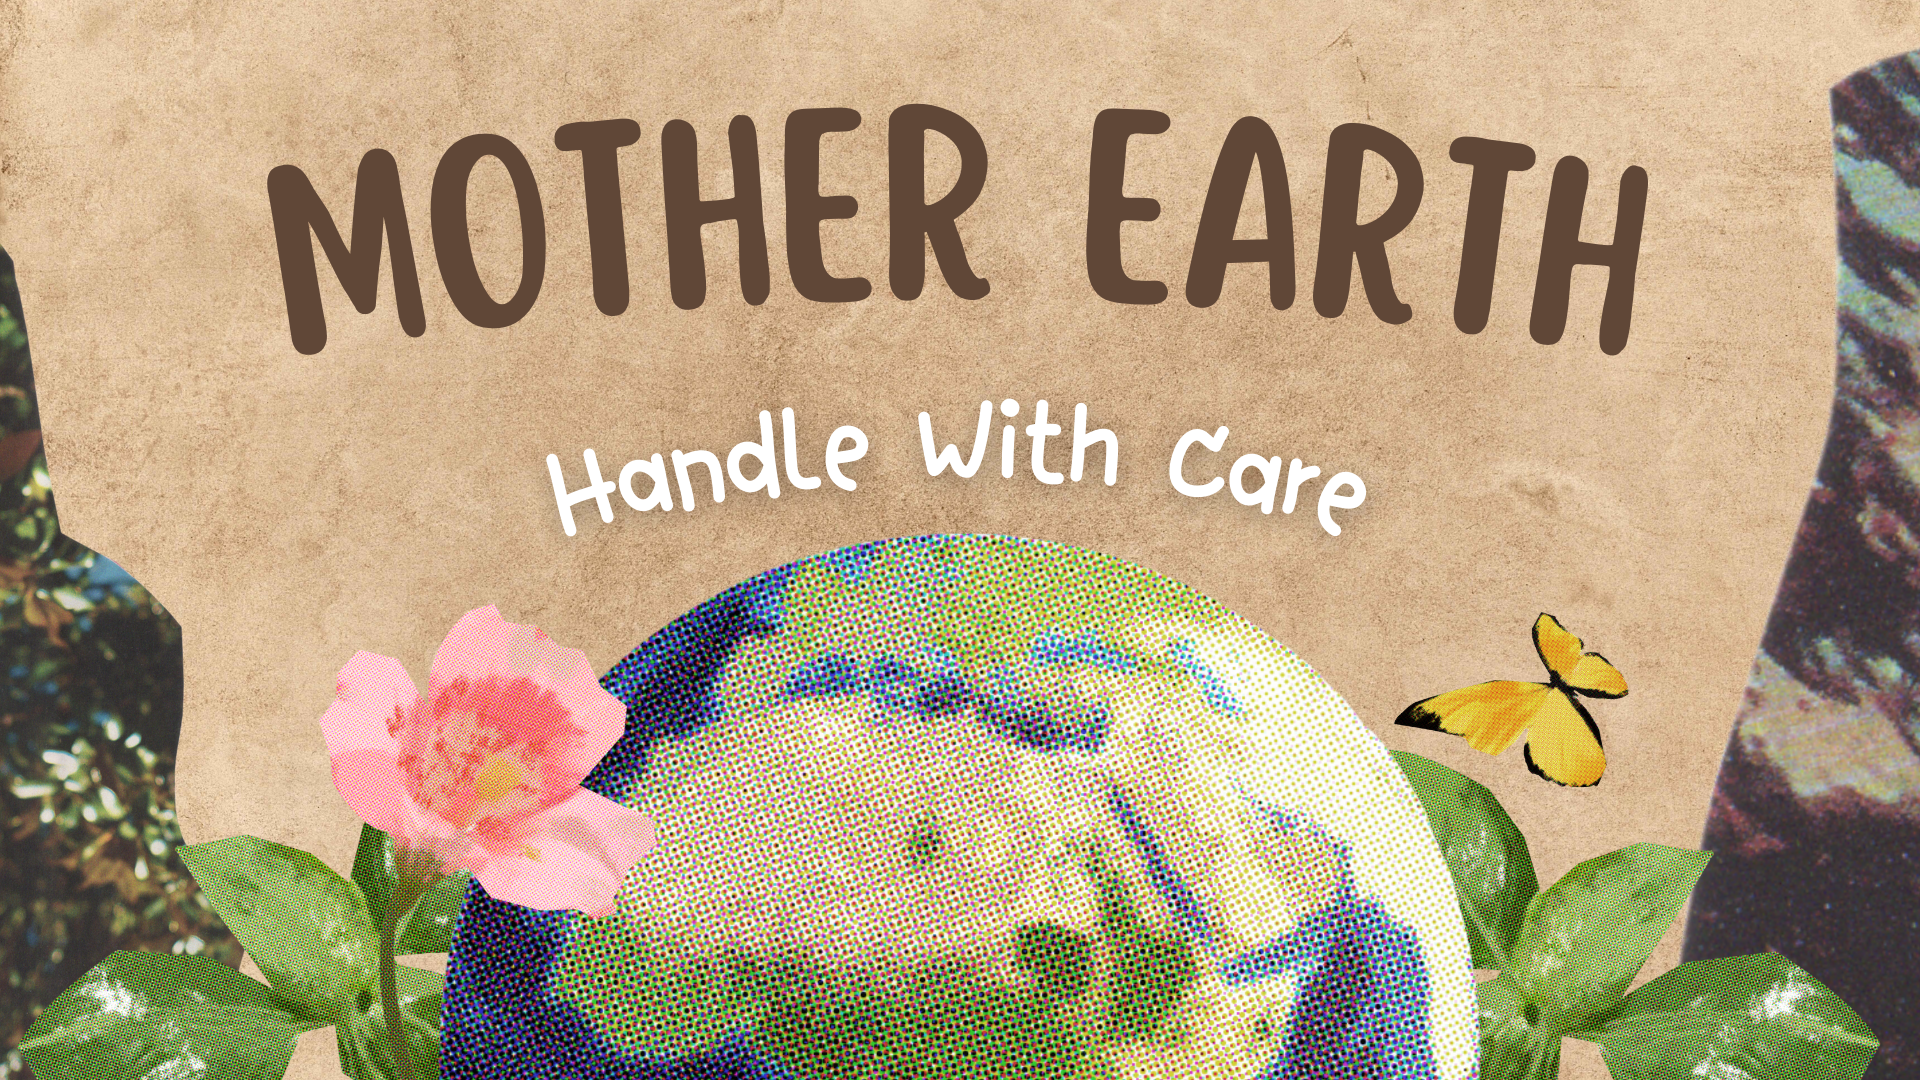 Earth Green: A Comprehensive Guide to Environmental Sustainability and Eco-Friendly Practices